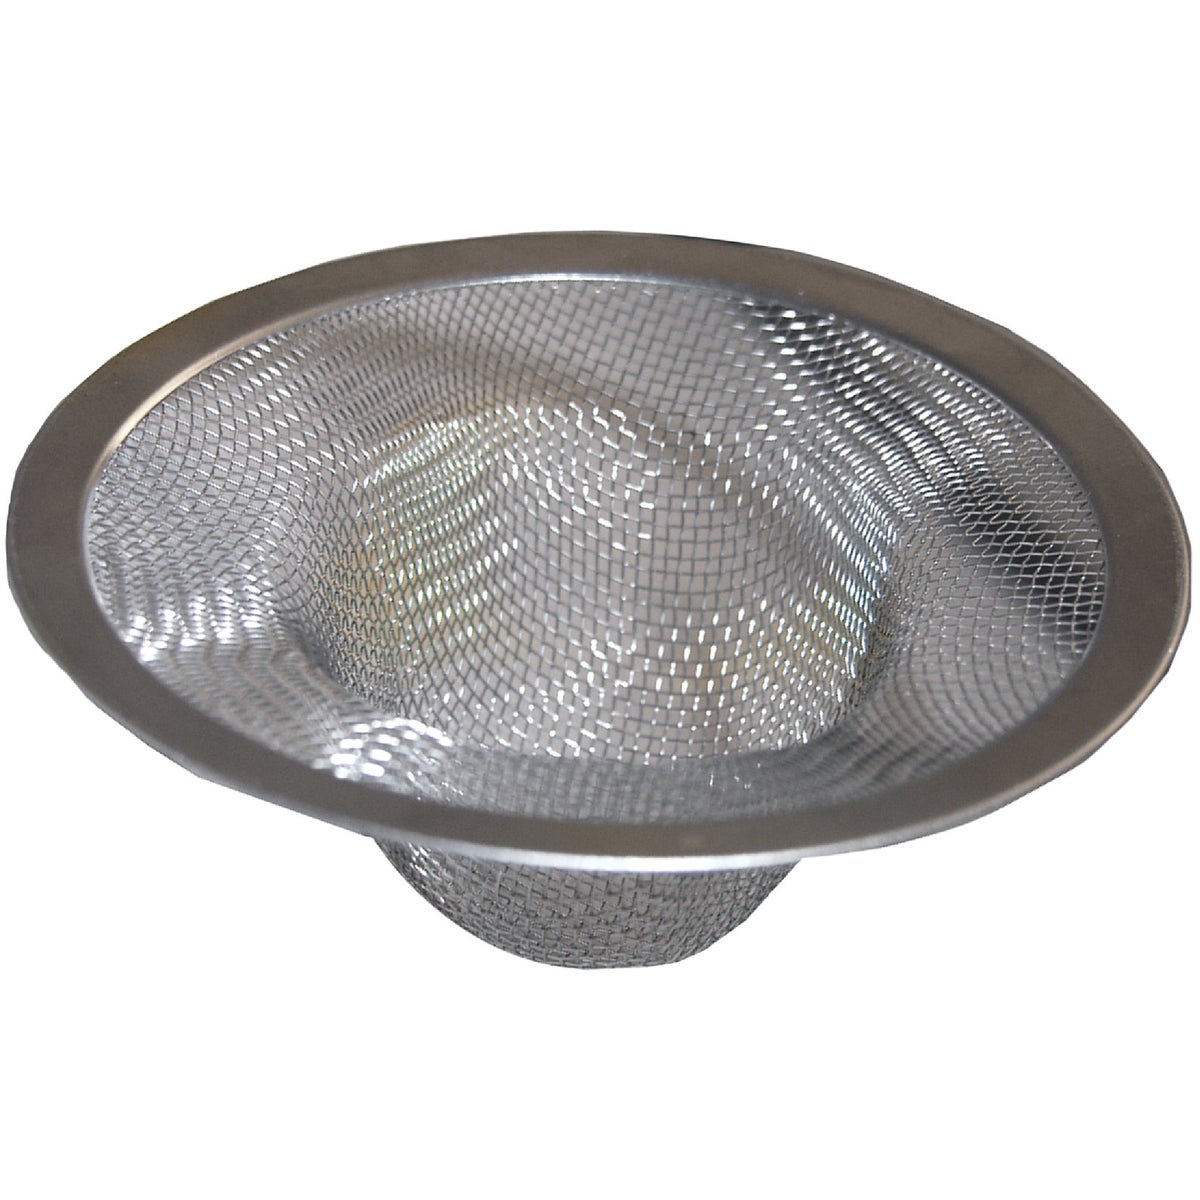 Lasco 4.4 In. Stainless Steel Mesh Kitchen Sink Strainer Cup